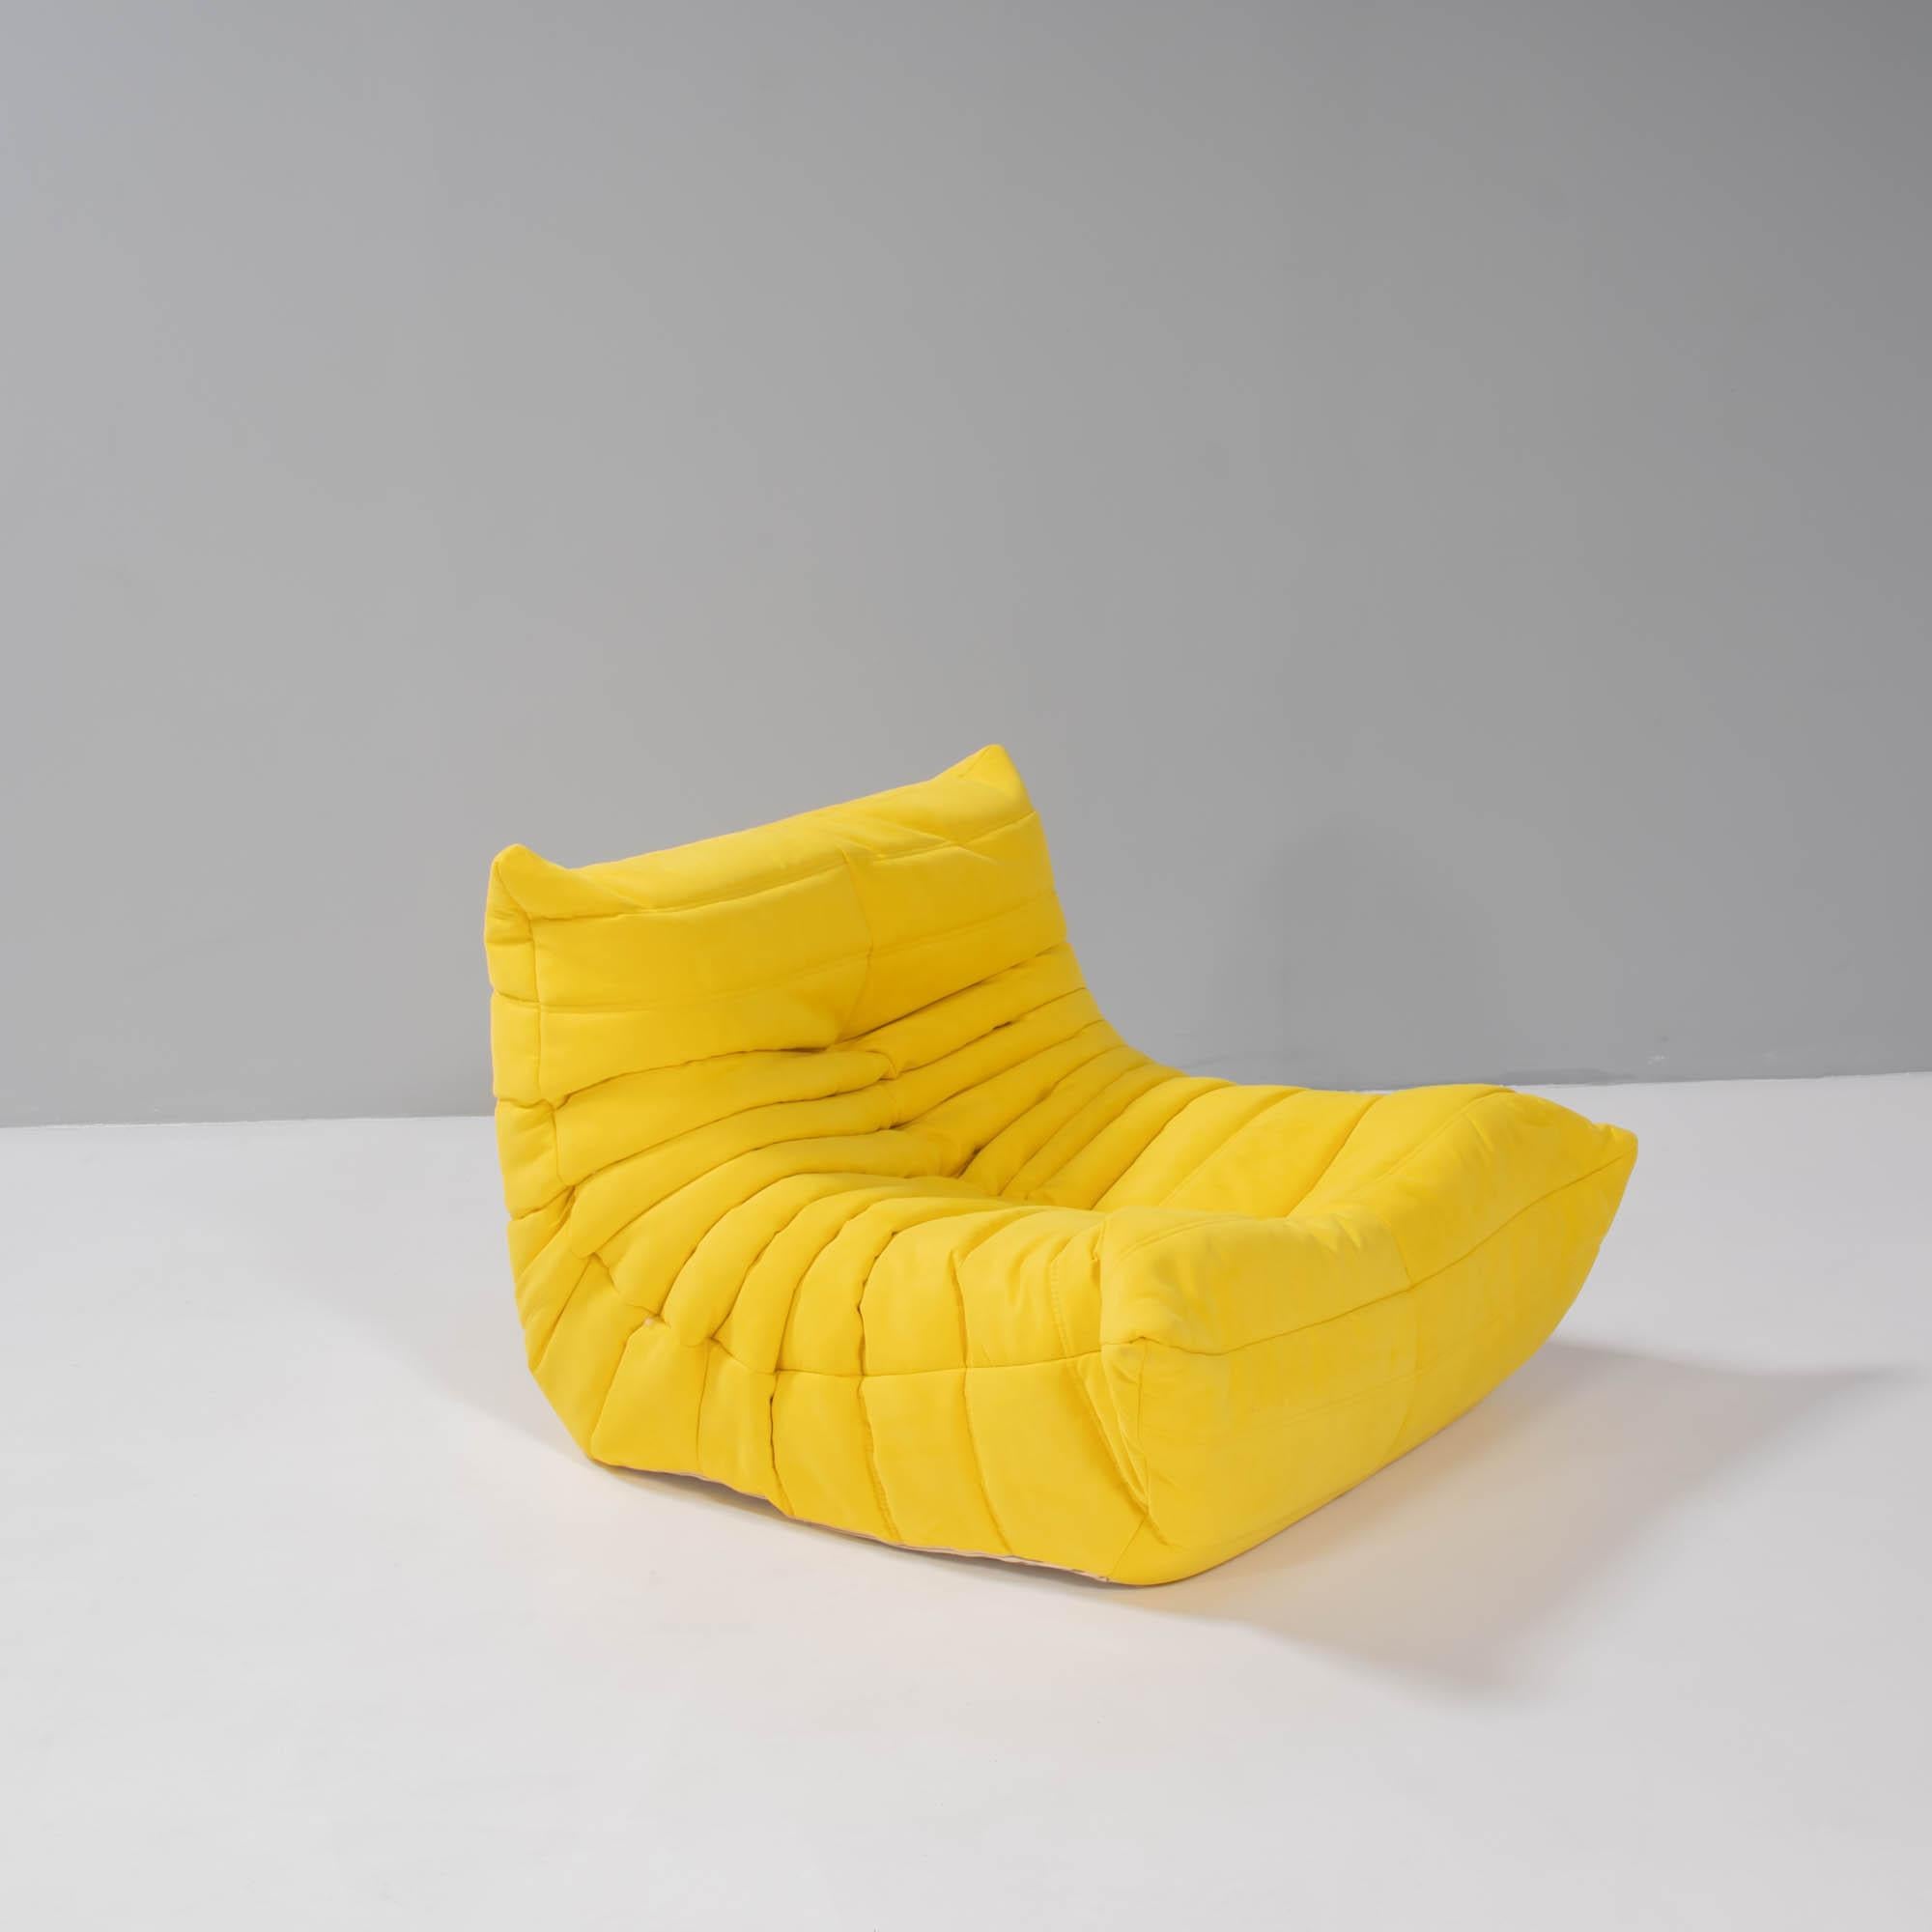 The iconic Togo yellow sofa, originally designed by Michel Ducaroy for Ligne Roset in 1973, has become a design mid century classic.

This fireside armchair and footstool is incredibly versatile and can be used alone or paired with other pieces